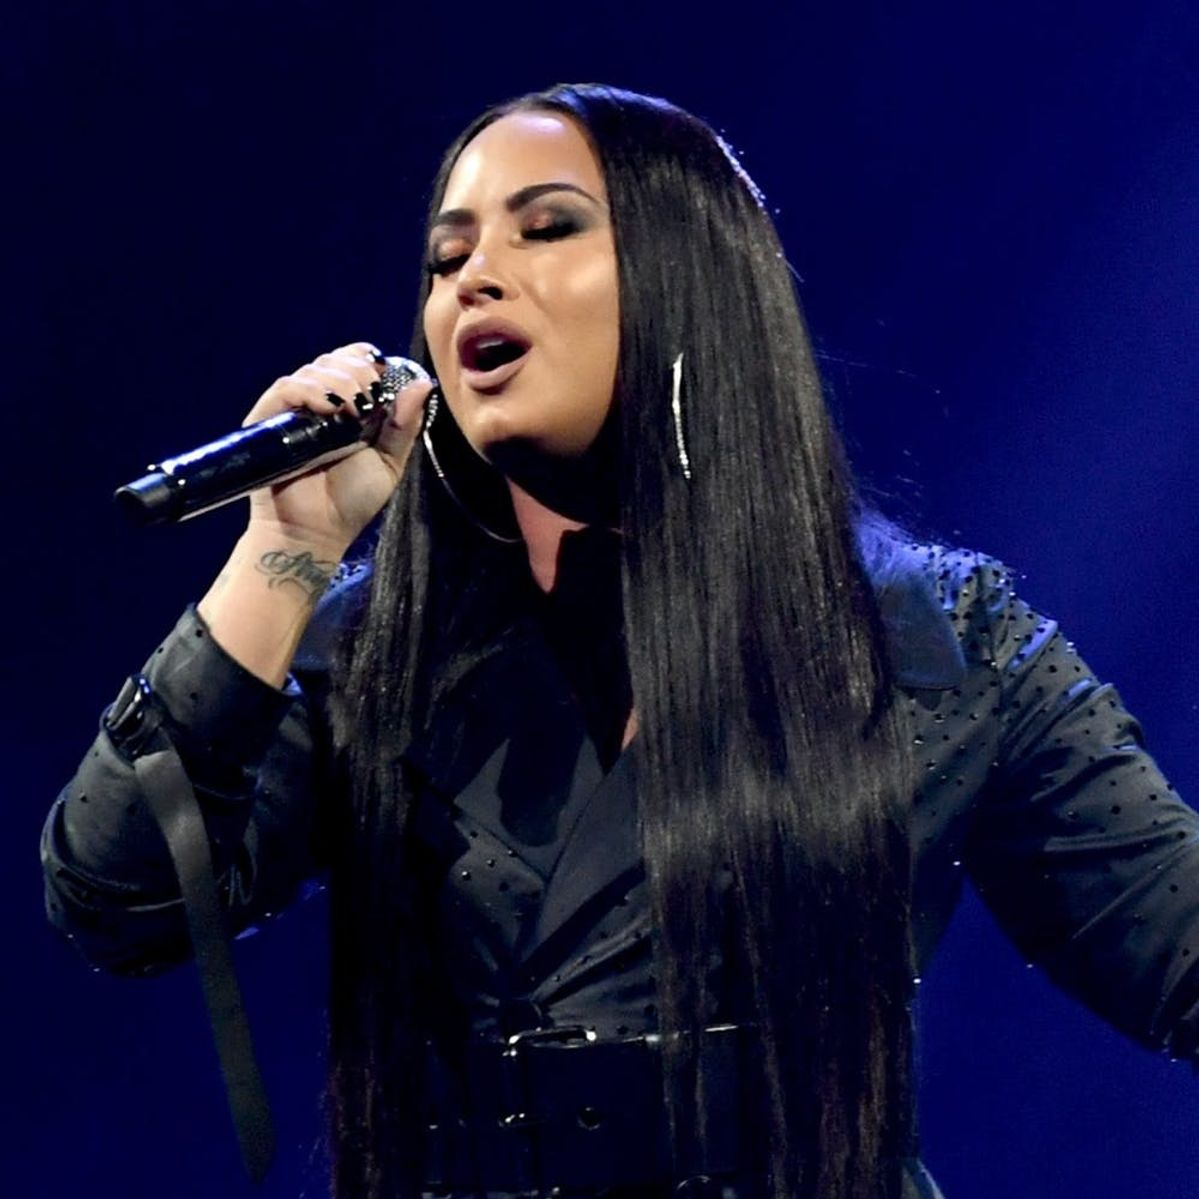 Demi Lovato Sings About Addiction Struggles and Relapsing in Her New Song ‘Sober’